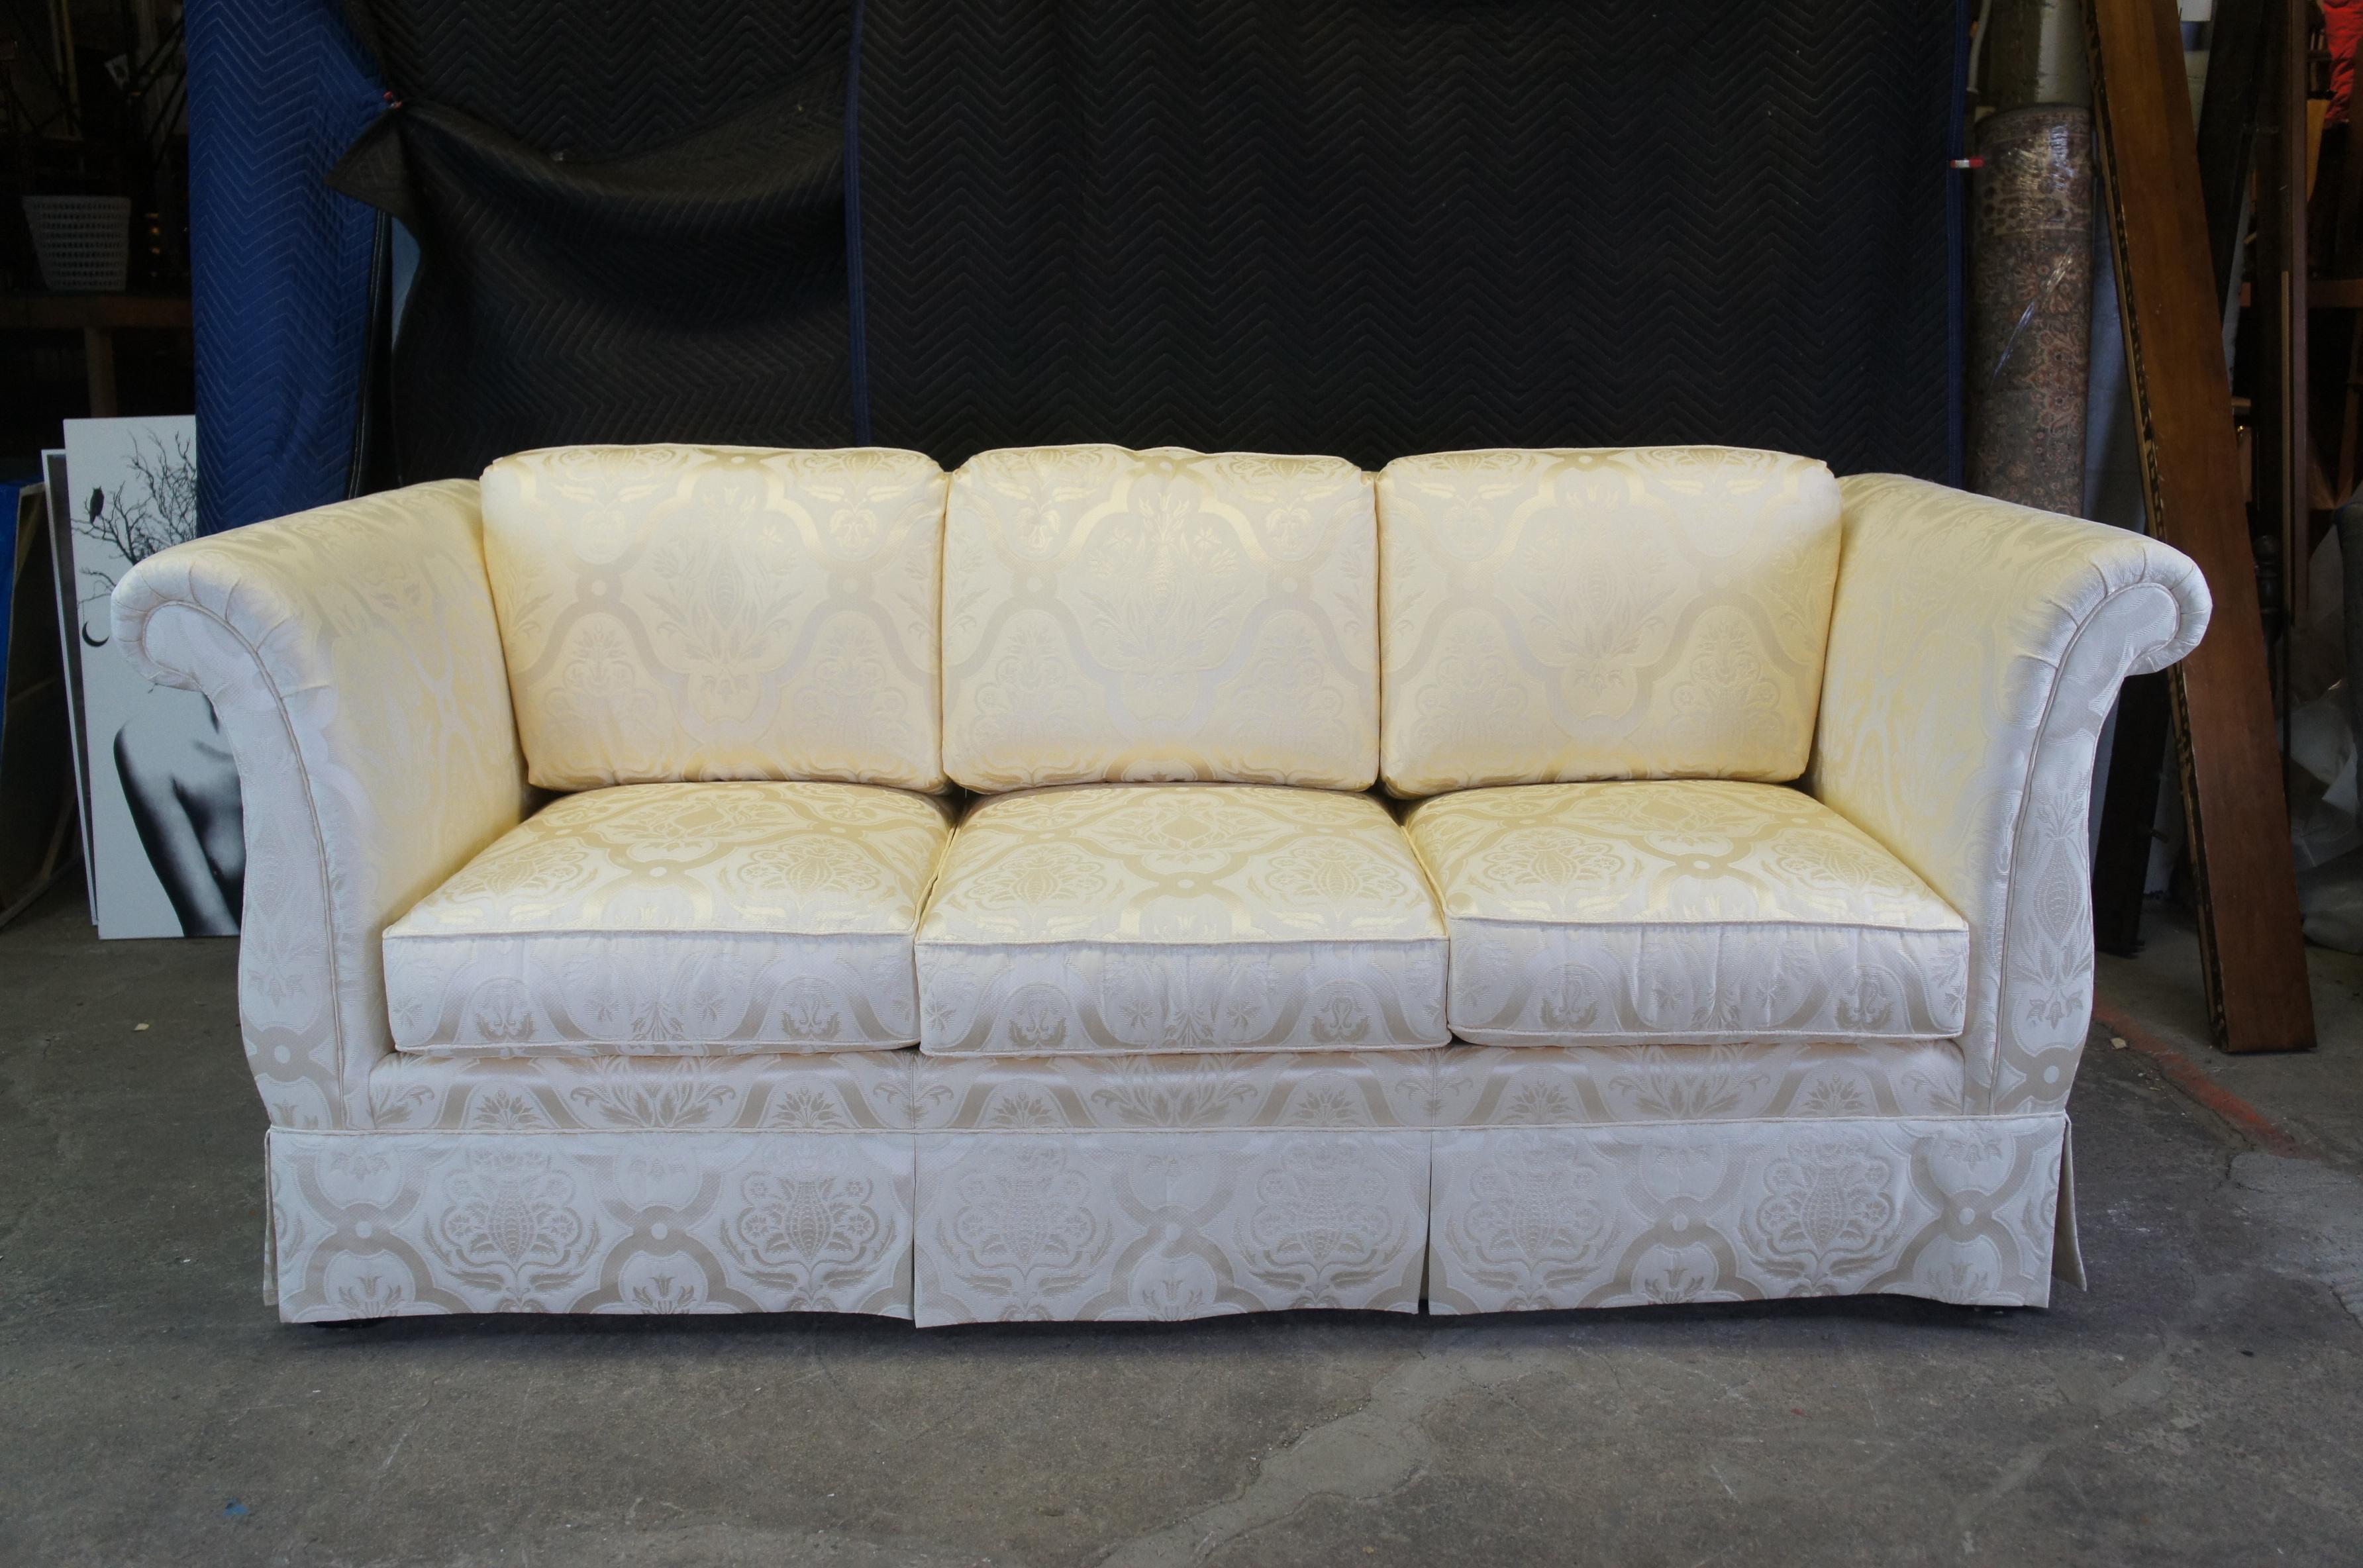 Upholstery Taylor King French Damask Silk Down Filled 3 Seat Rolled High Arm Sofa Couch 91